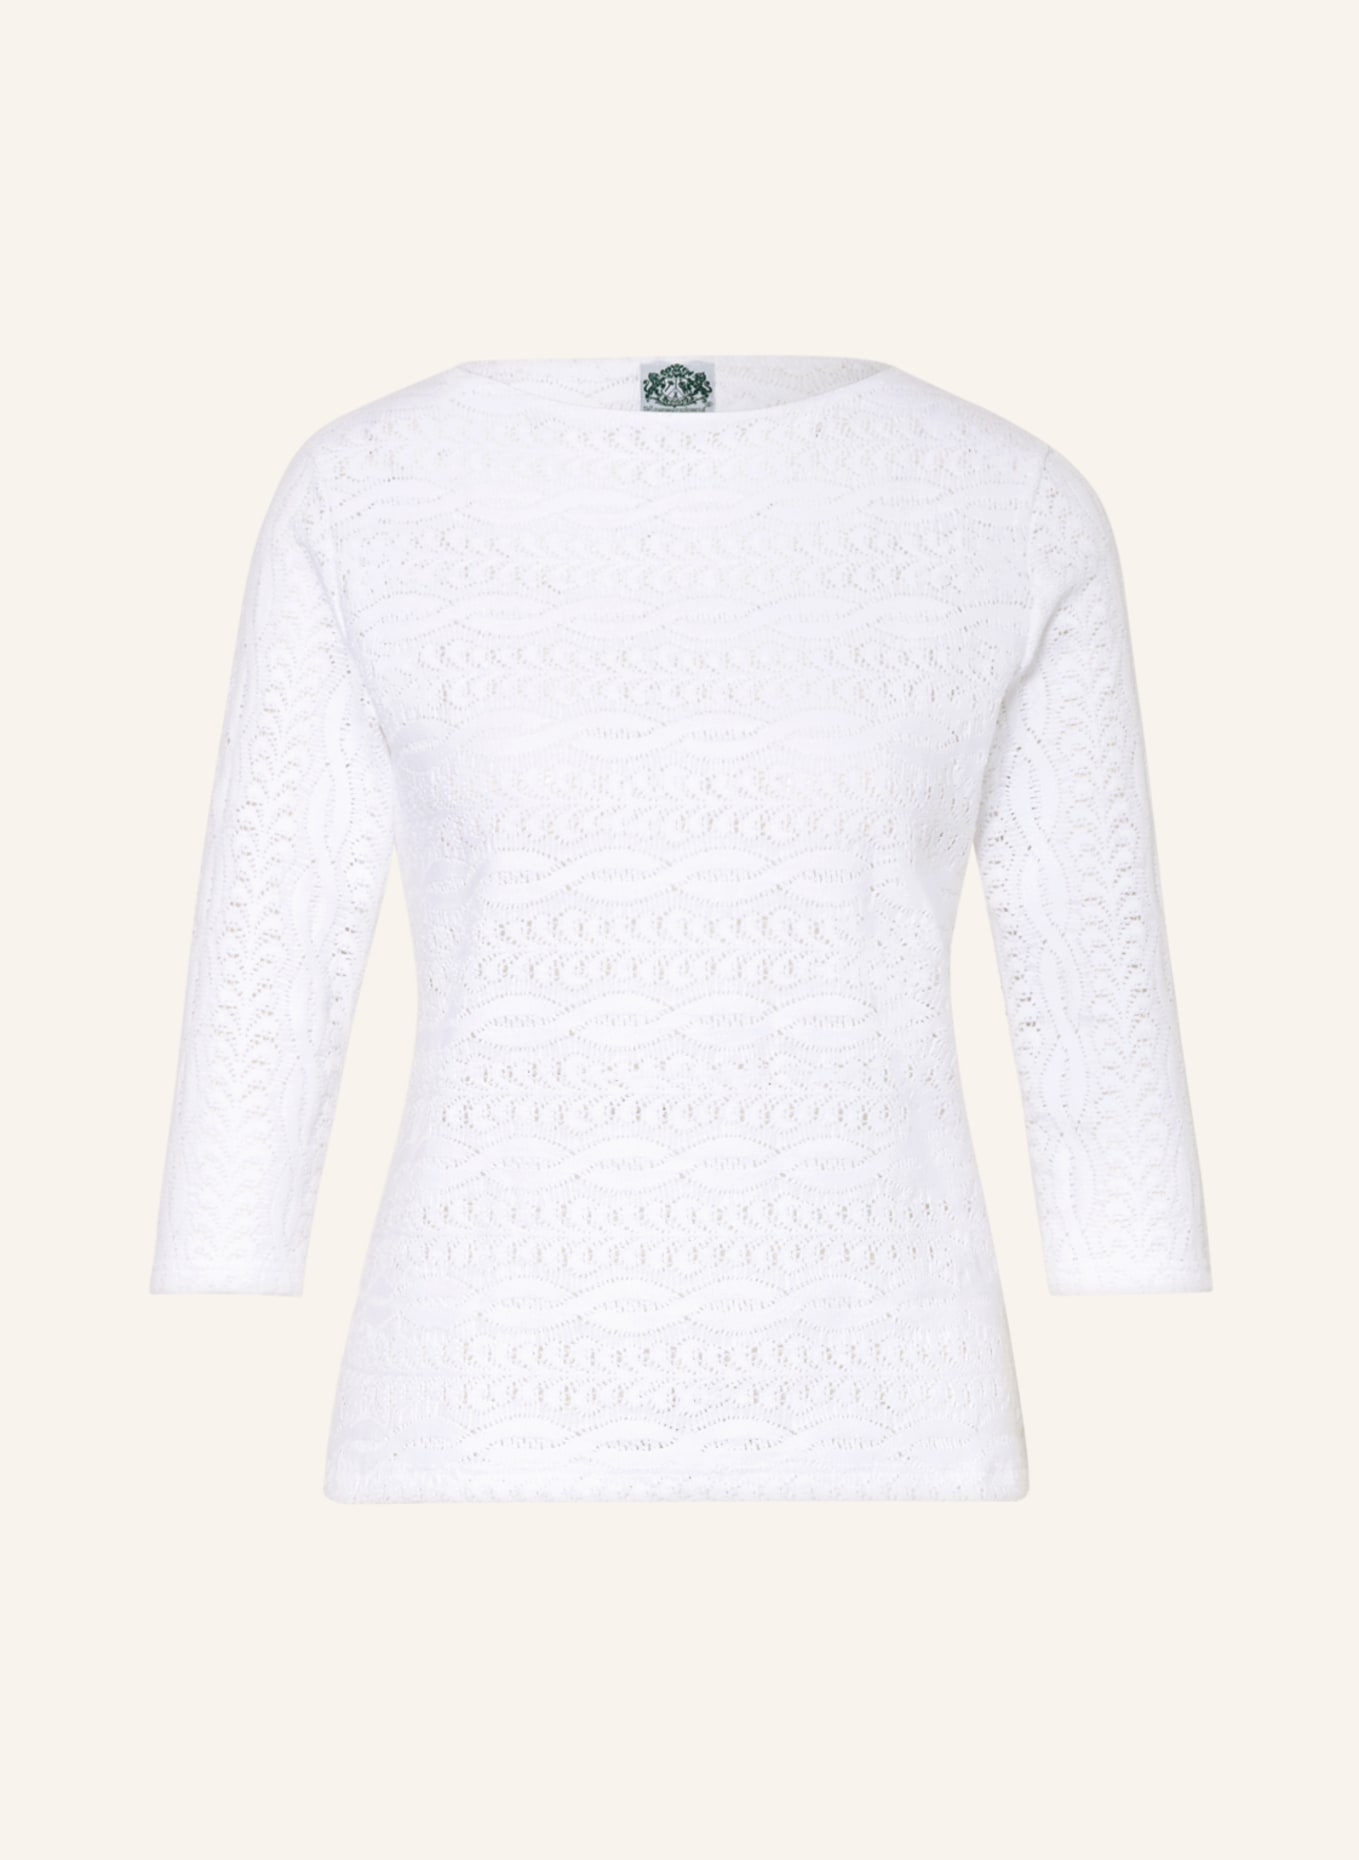 Hammerschmid Shirt made of crochet lace with 3/4 sleeves, Color: WHITE (Image 1)